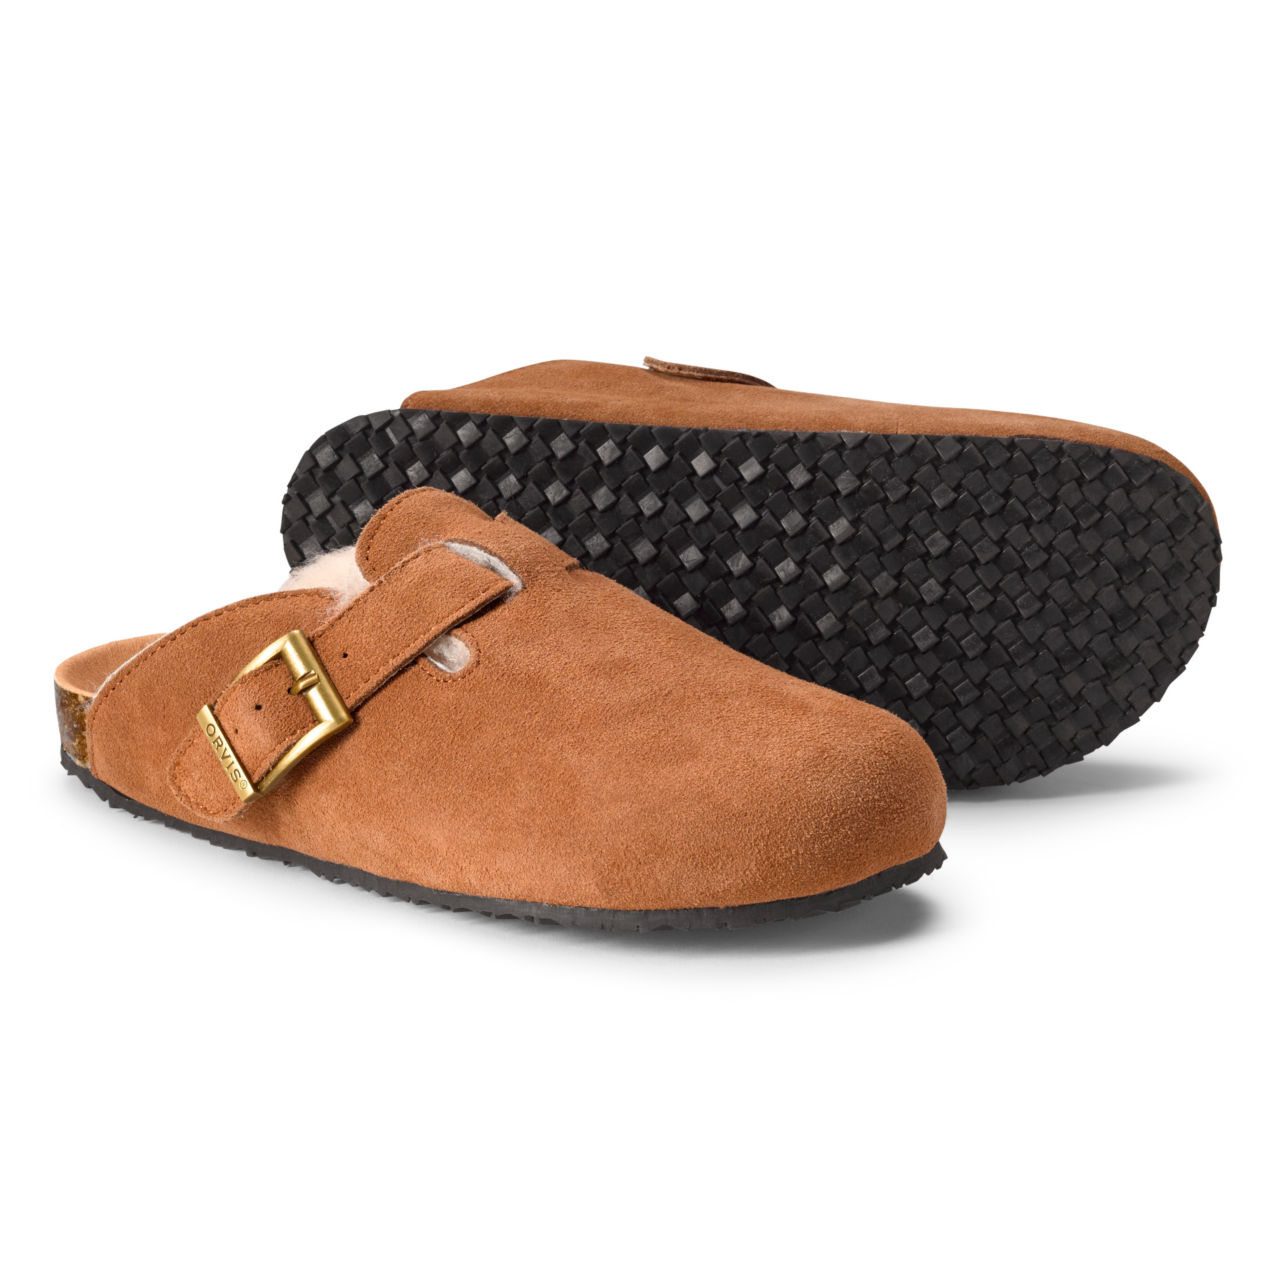 Orvis Lodge Shearling Clogs - NATURAL image number 0